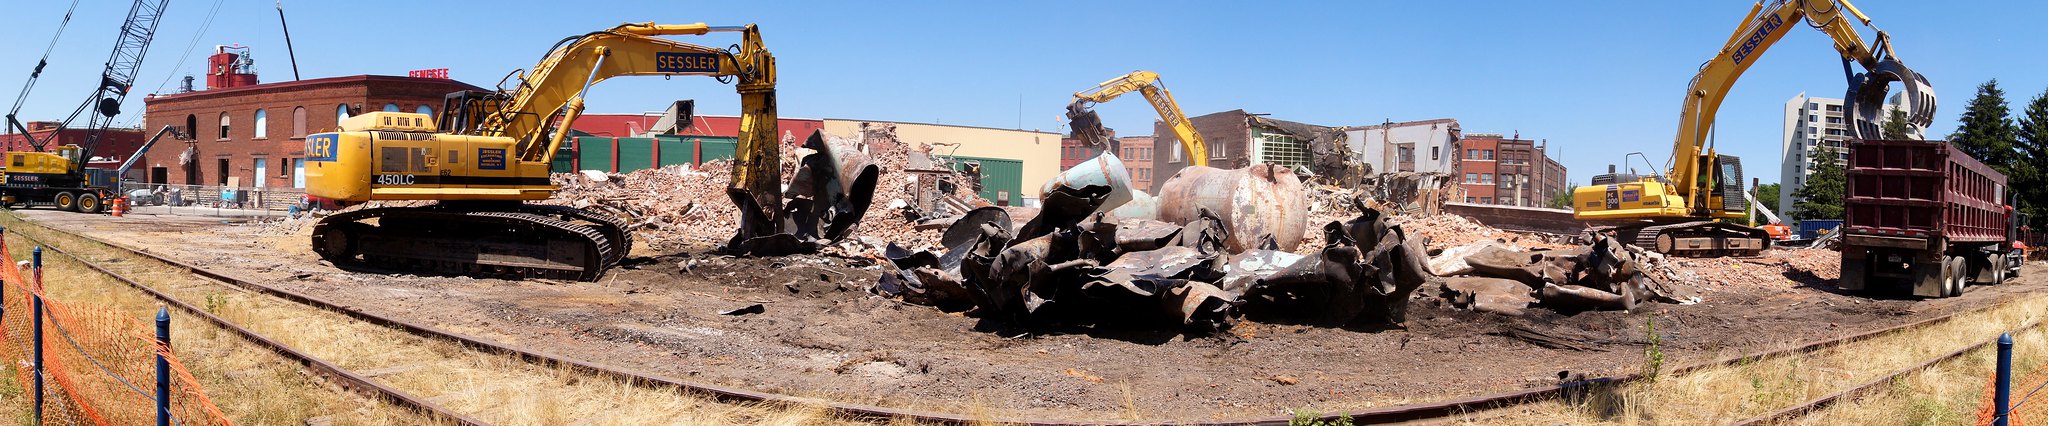 Genesee Brewery, demolition of historic Cataract Brewhouse. [PHOTO: Rick U.- RocPx.com]